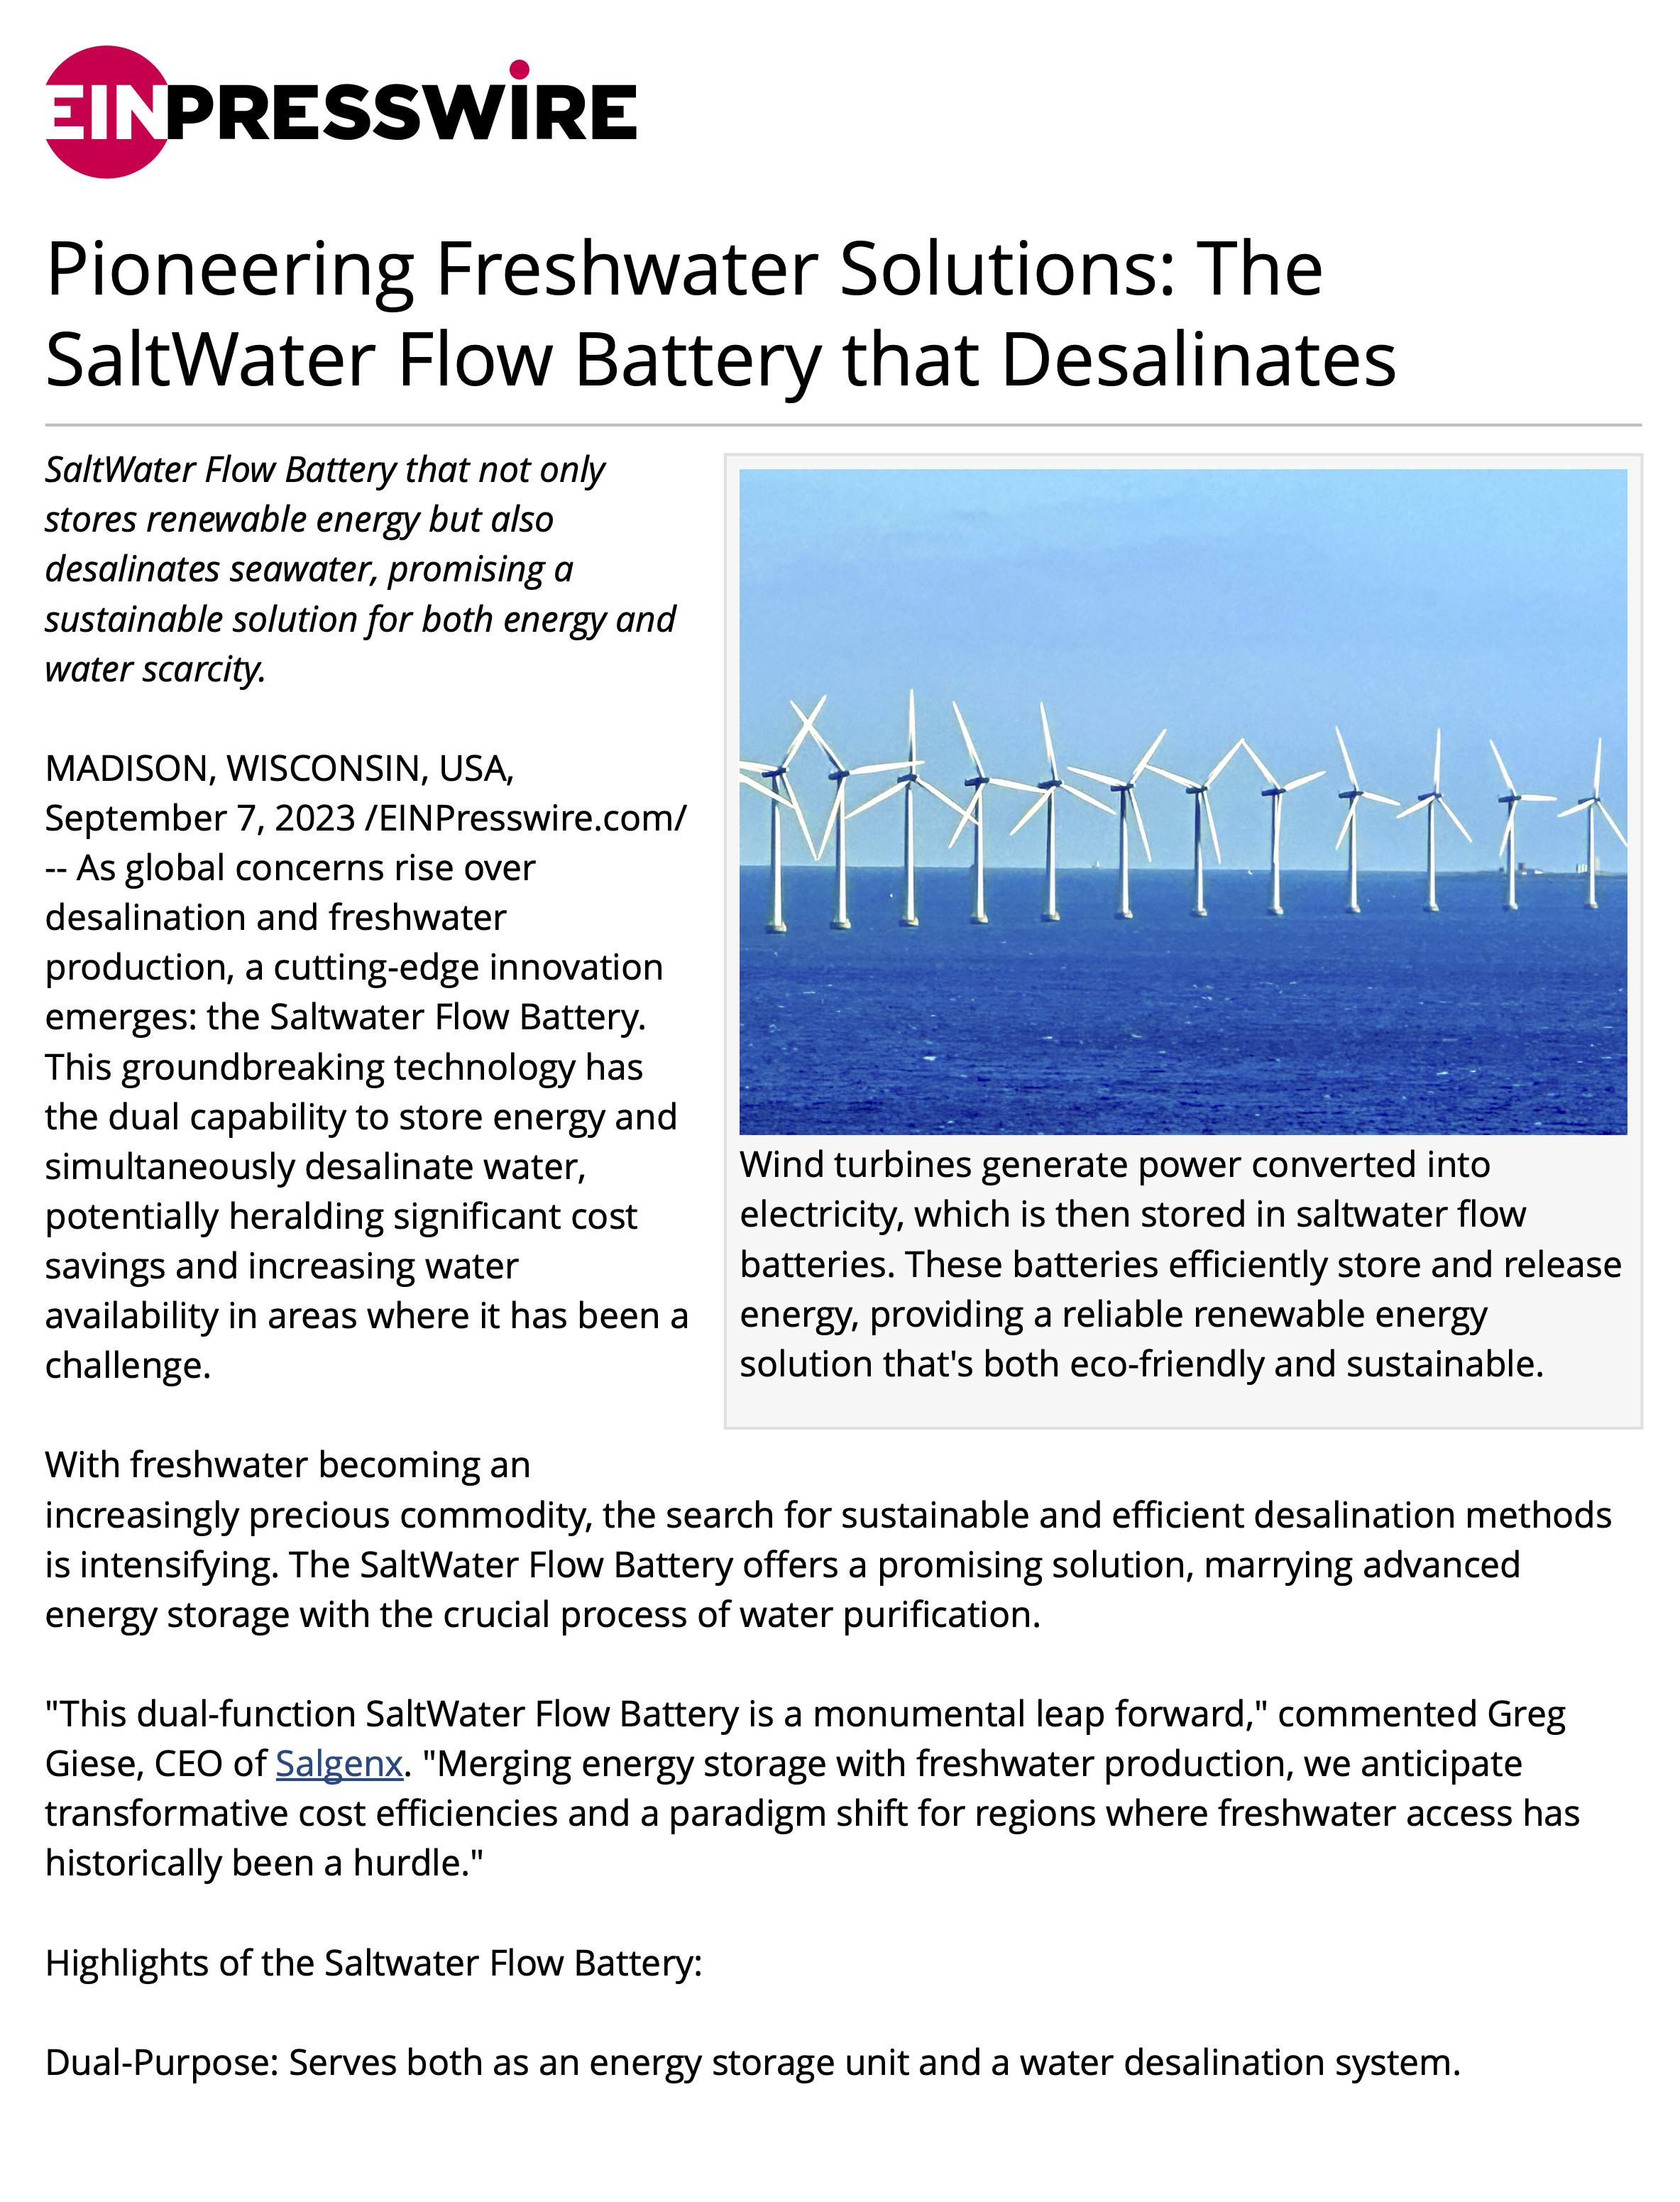 Pioneering Freshwater Solutions: The SaltWater Flow Battery that Desalinates